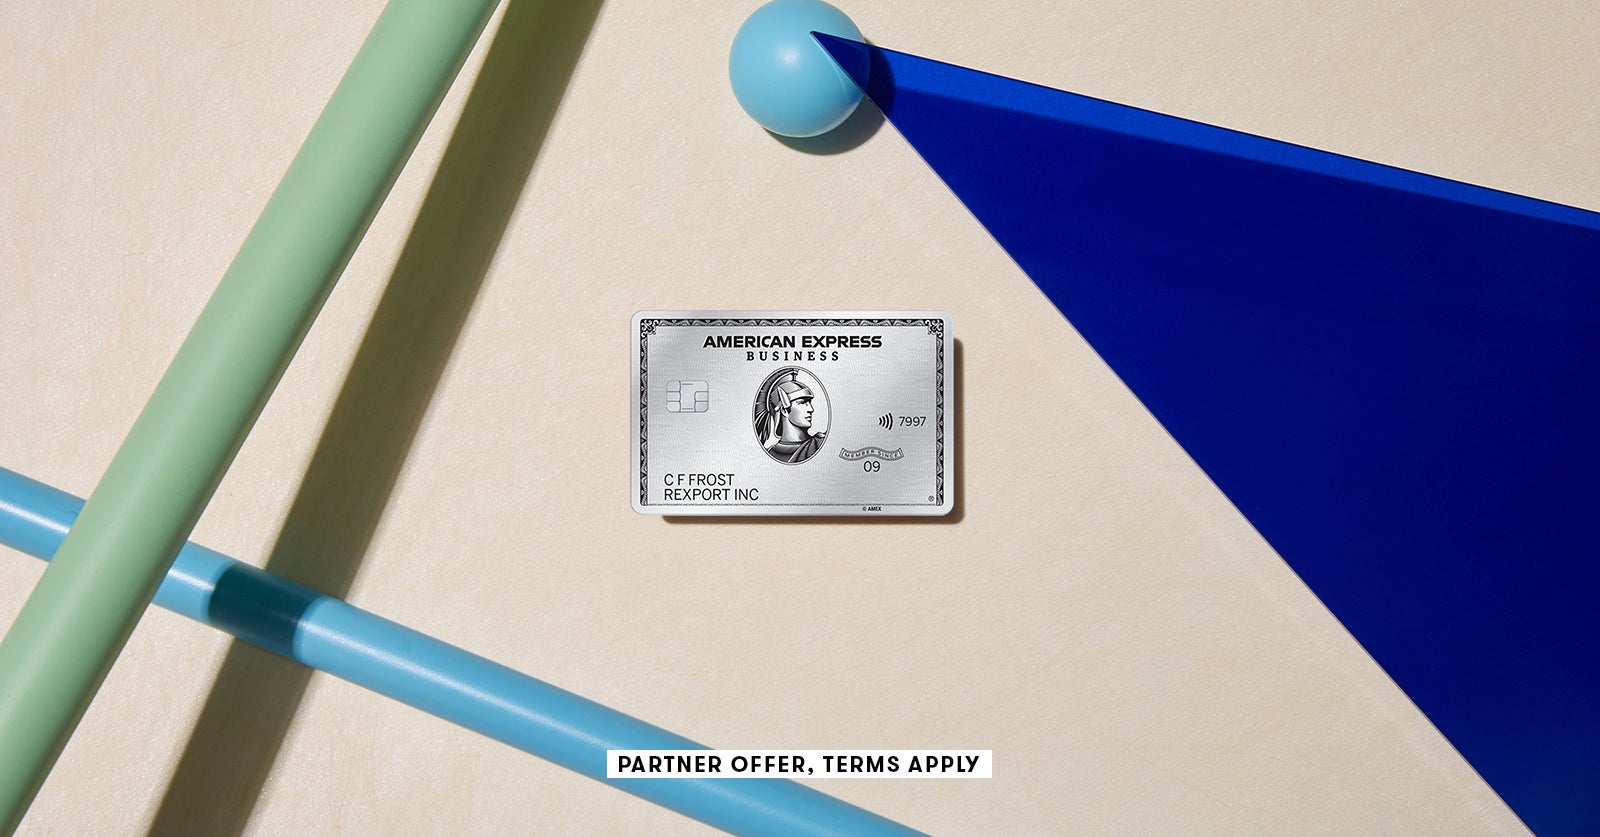 Last day to apply for the Amex Business Platinum Card 125k offer